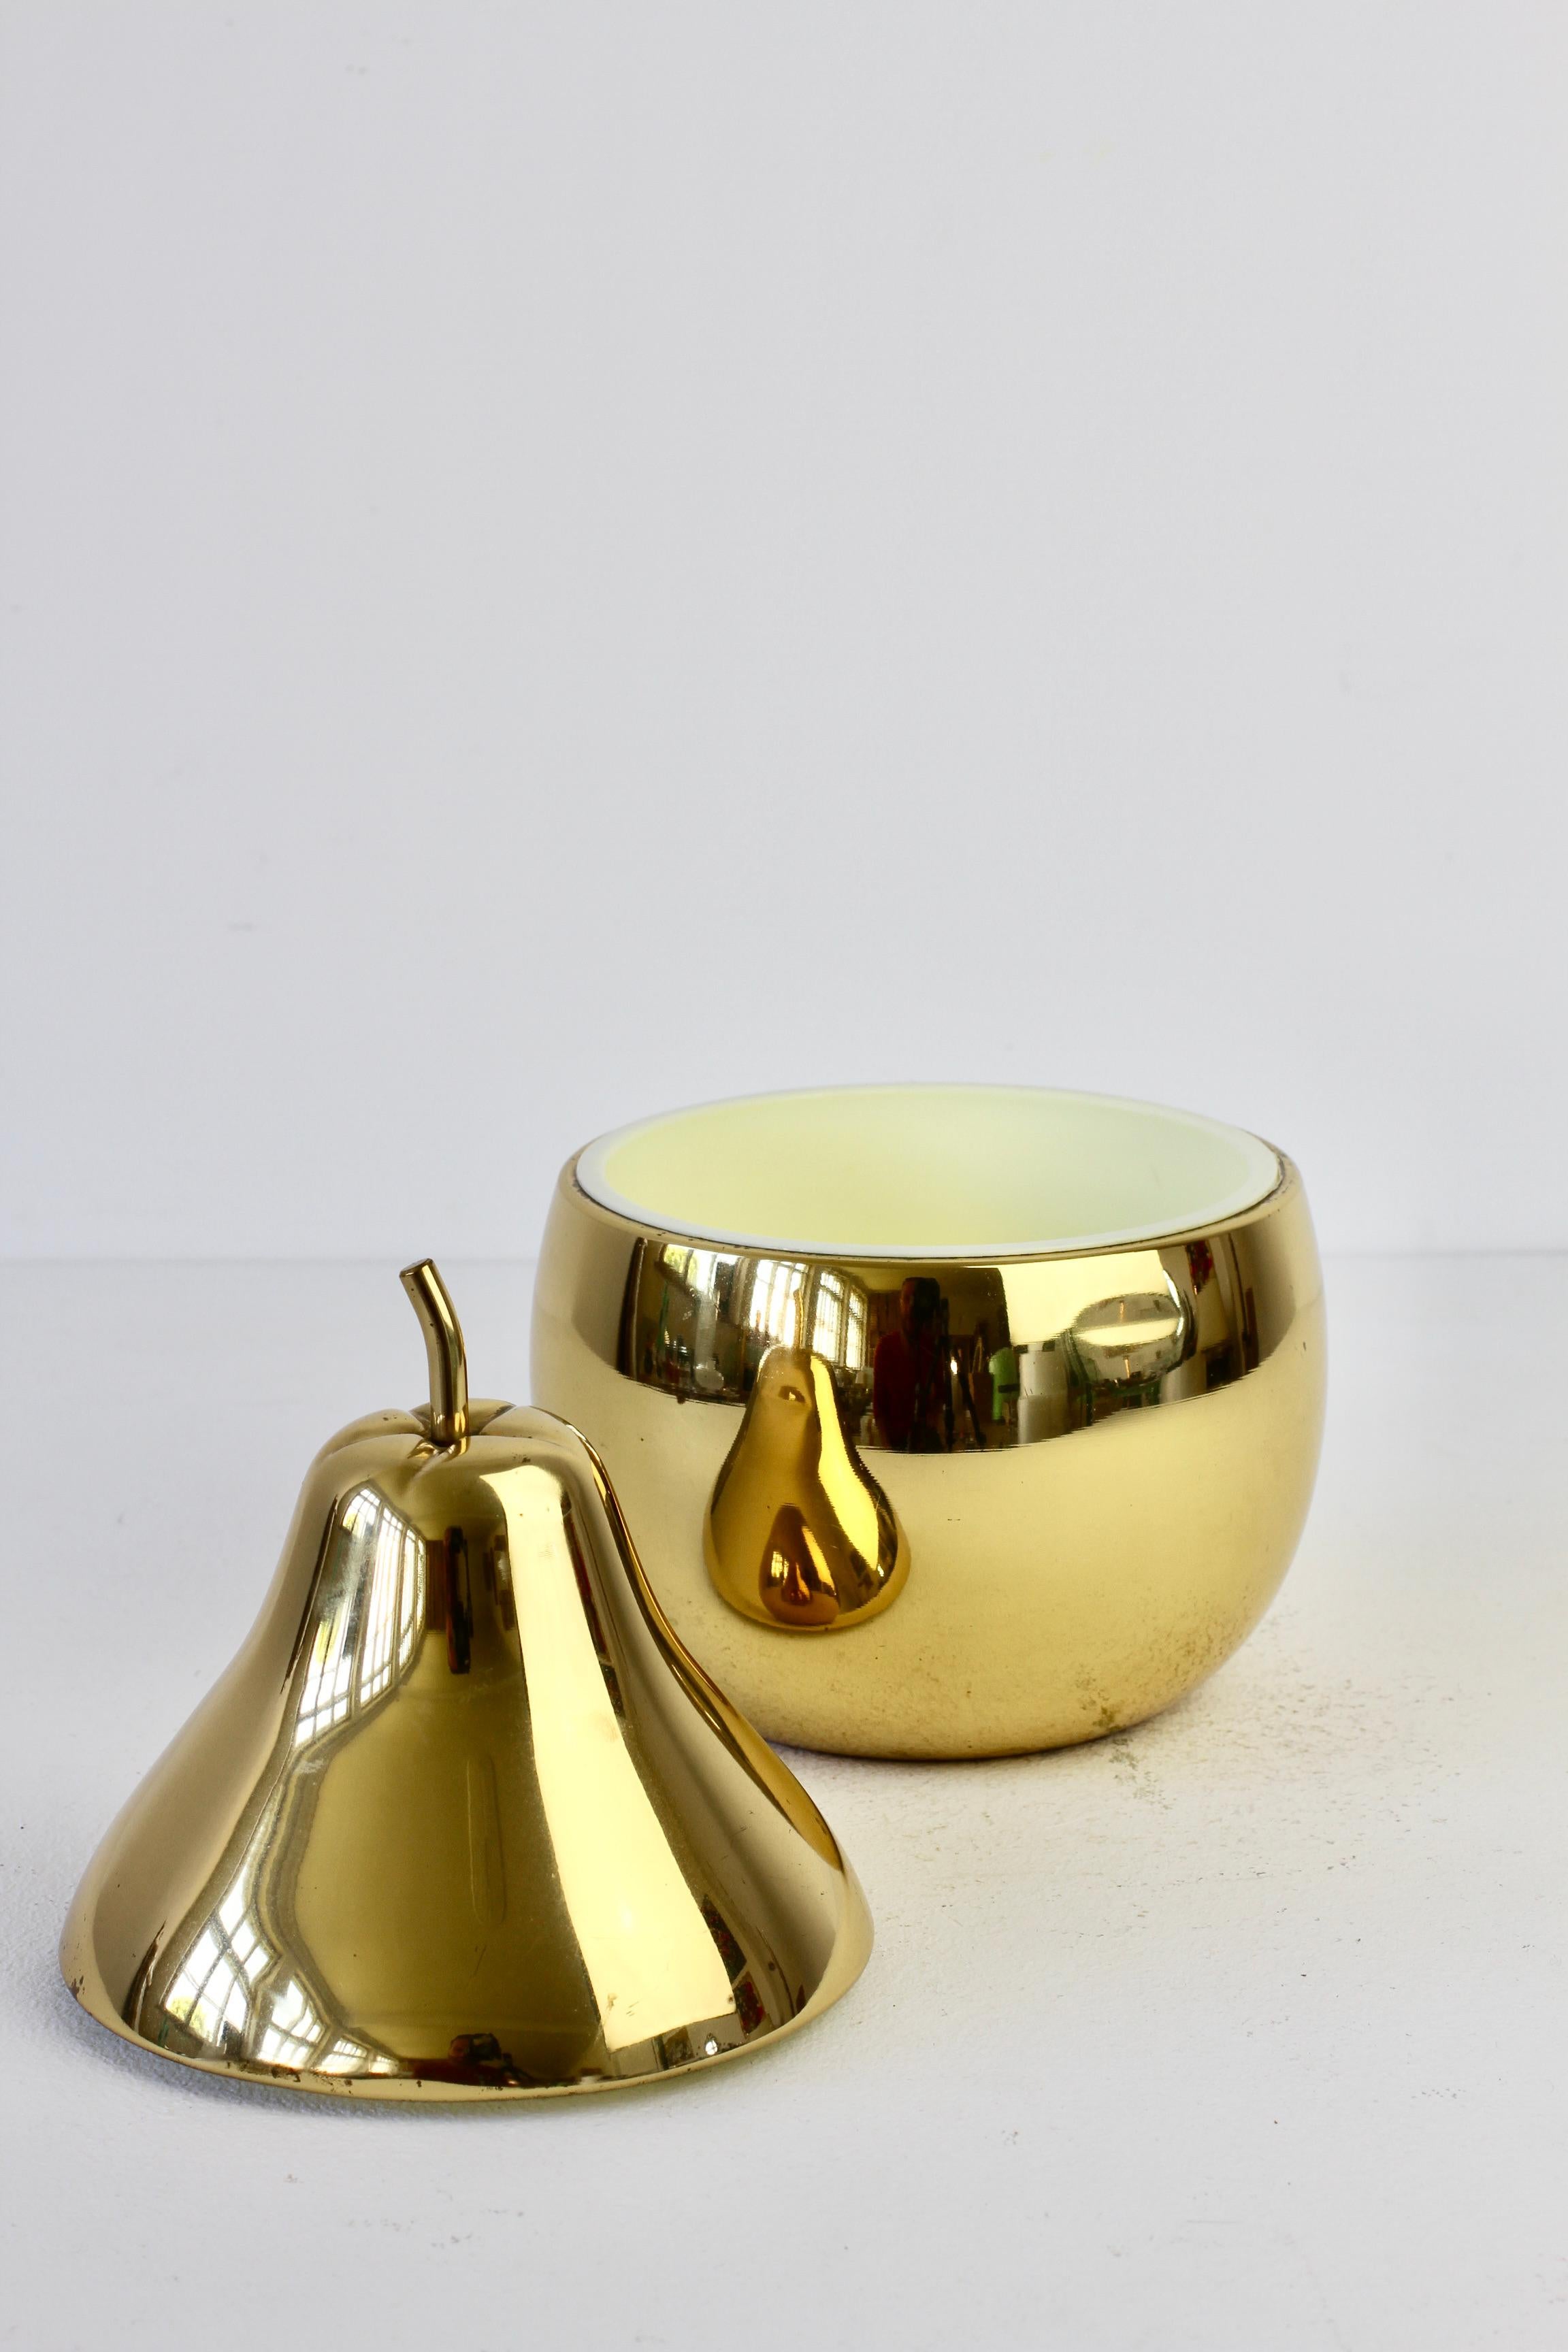 Ettore Sottsass Style Vintage Pear Shaped Brass Ice Cube Bucket or Holder, 1970s For Sale 3